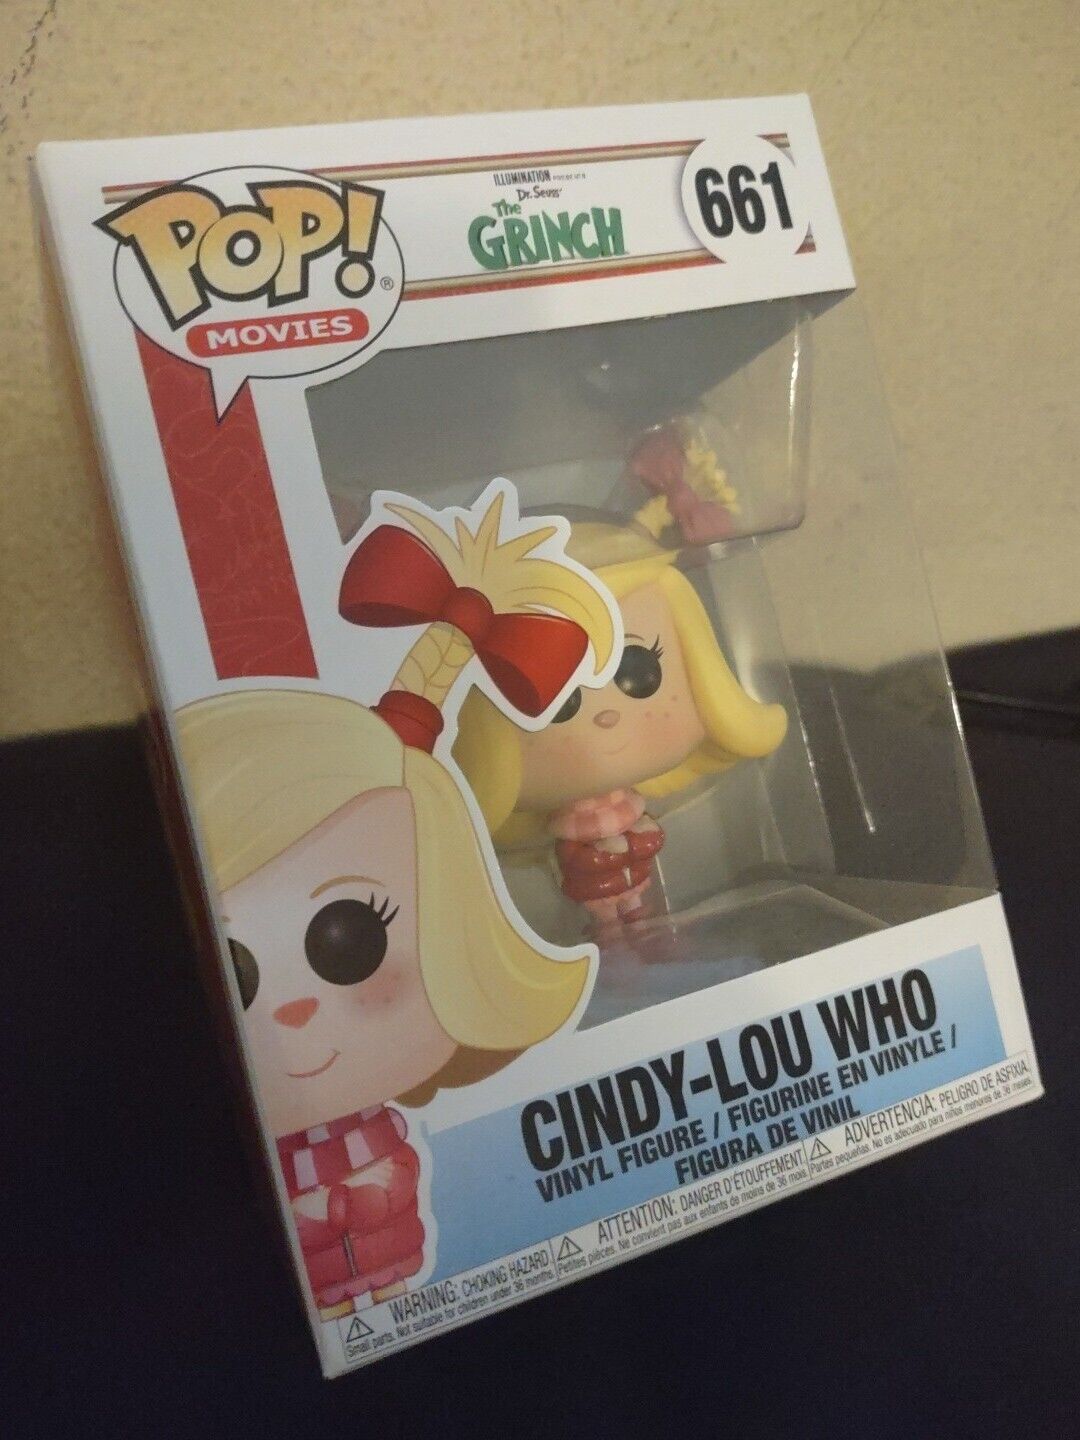 BrandNew Cindy-Lou Who Figure- Funko Pop Grinch #661 COLLECTORs😸Free $hiPPinG 